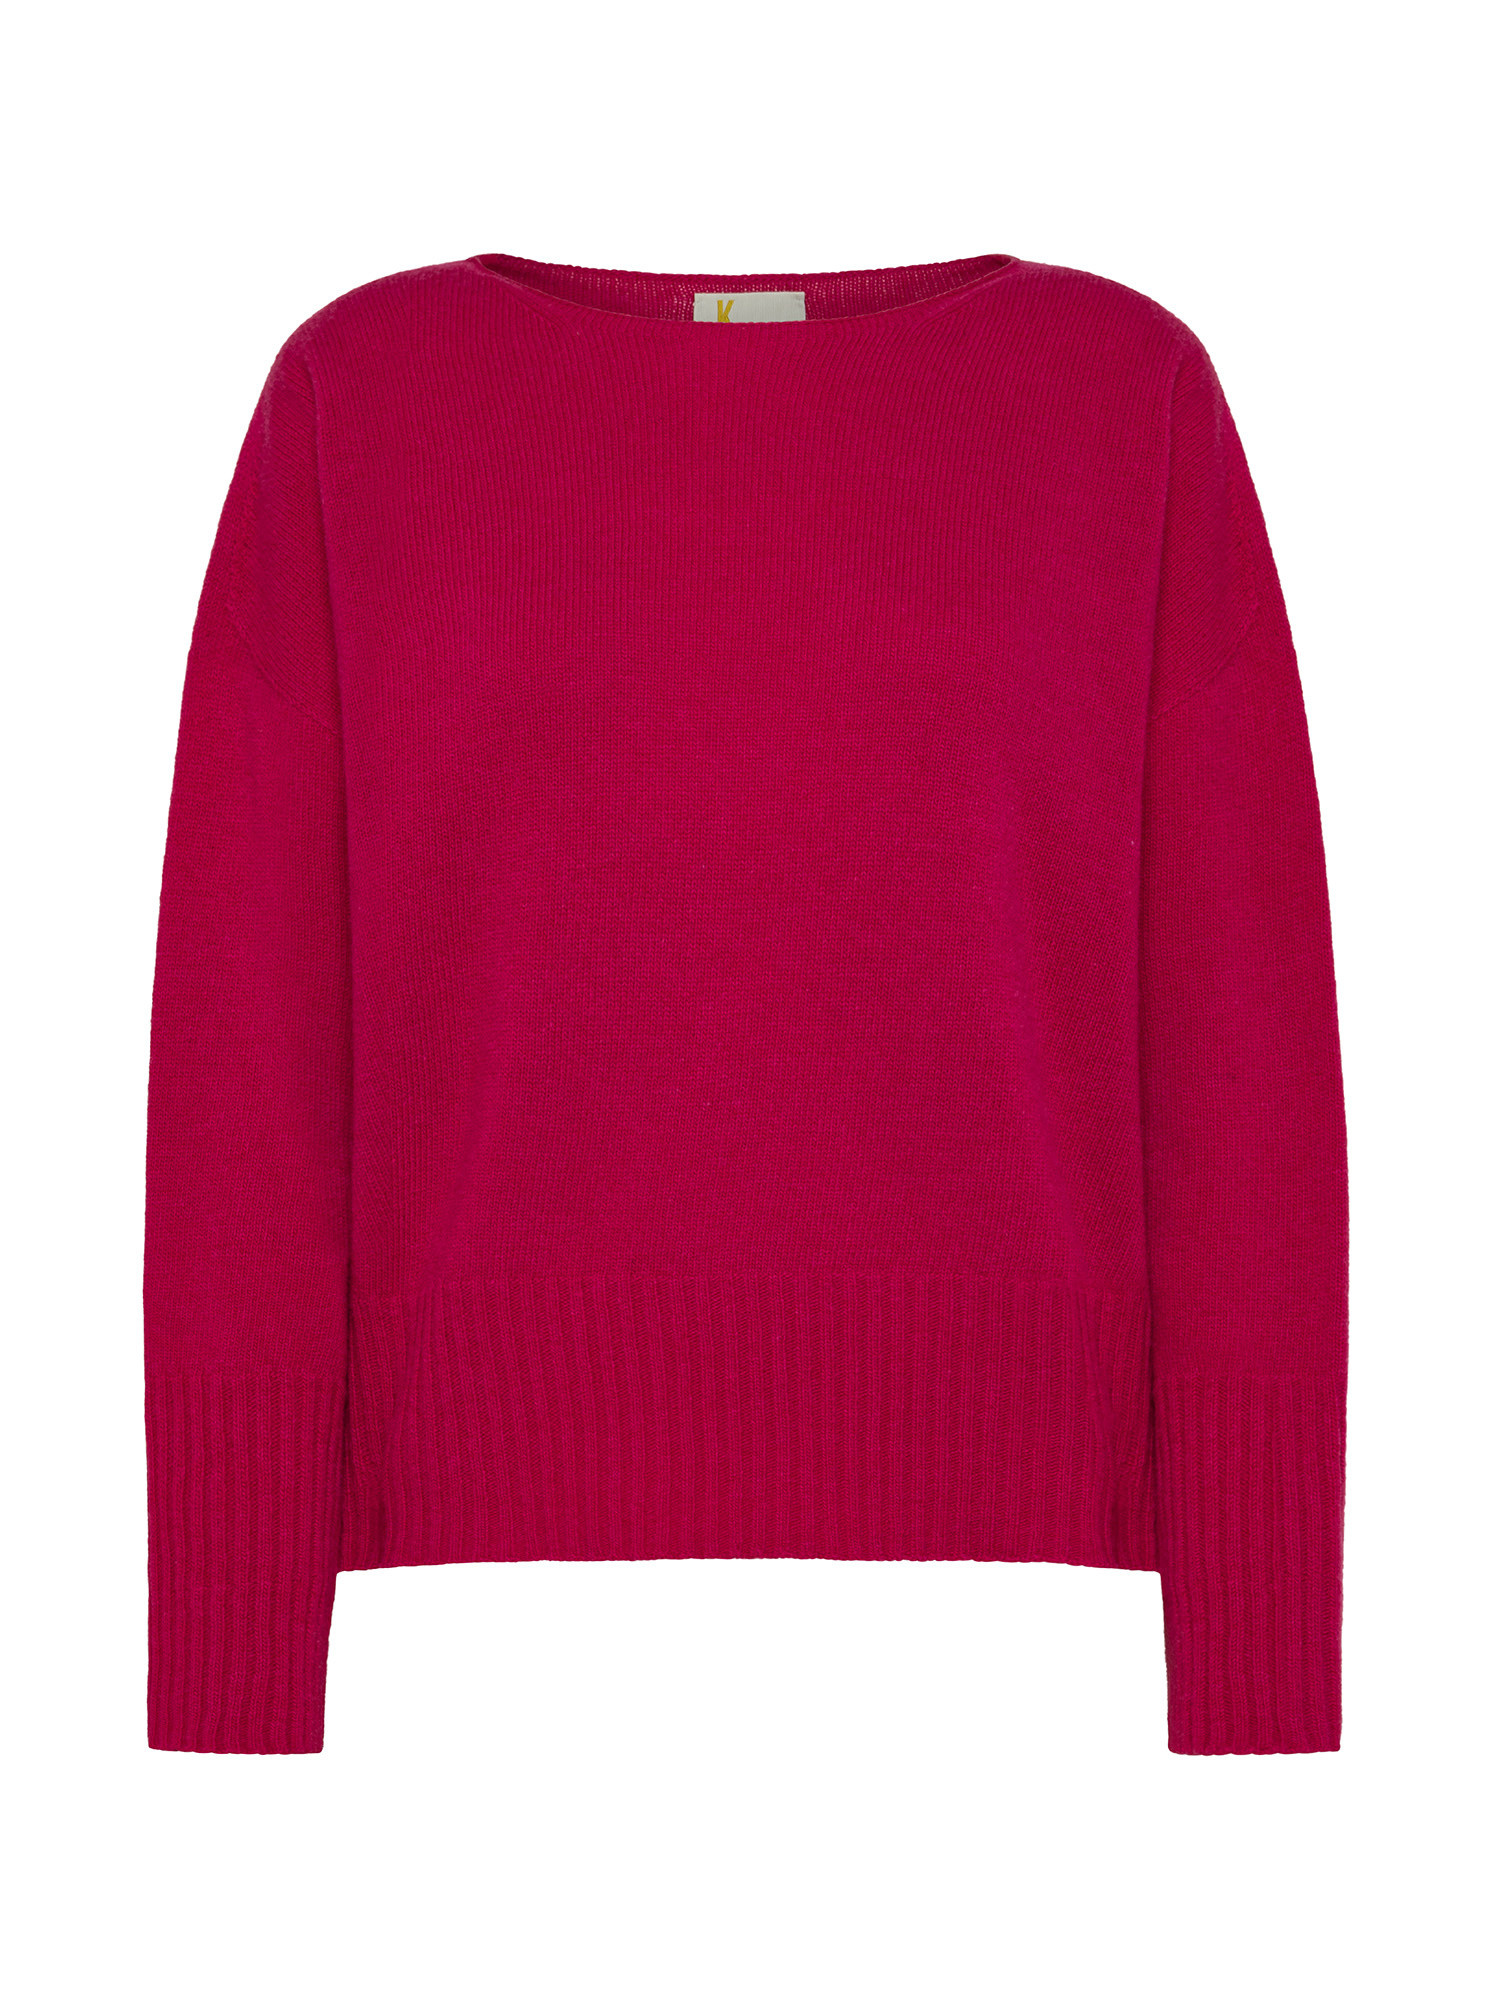 K Collection - Pullover in lana cardata, Rosa fuxia, large image number 0